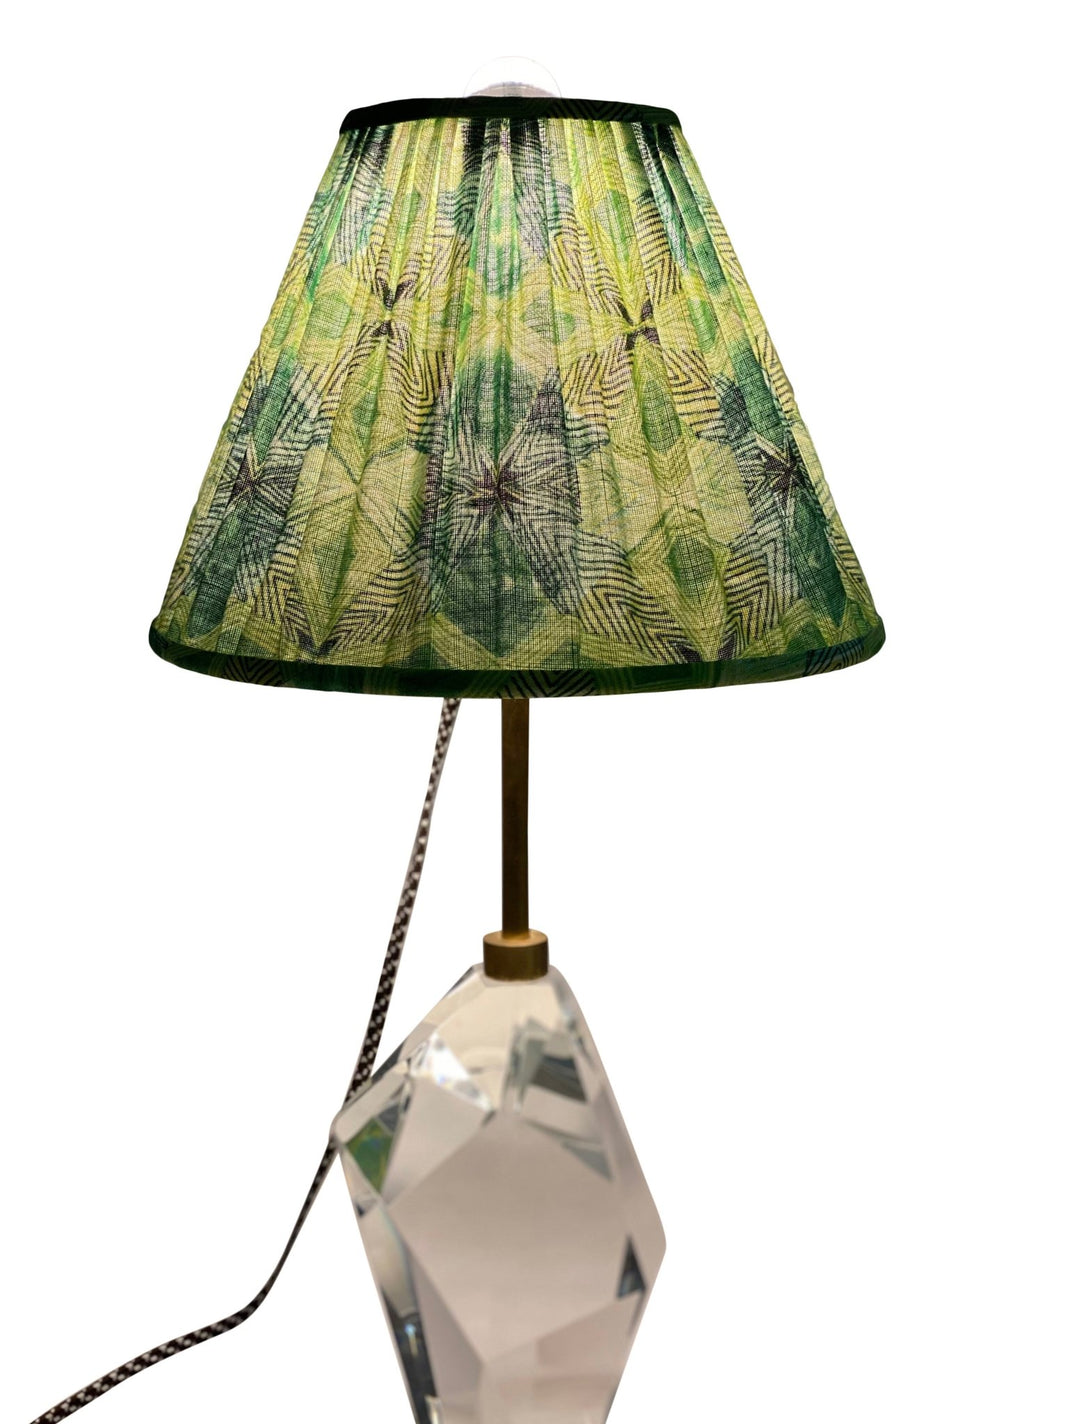 Nzuri Textiles Custom Lamp Shades - Hand-Painted Print Textile Collection - Lux Lamp Shades